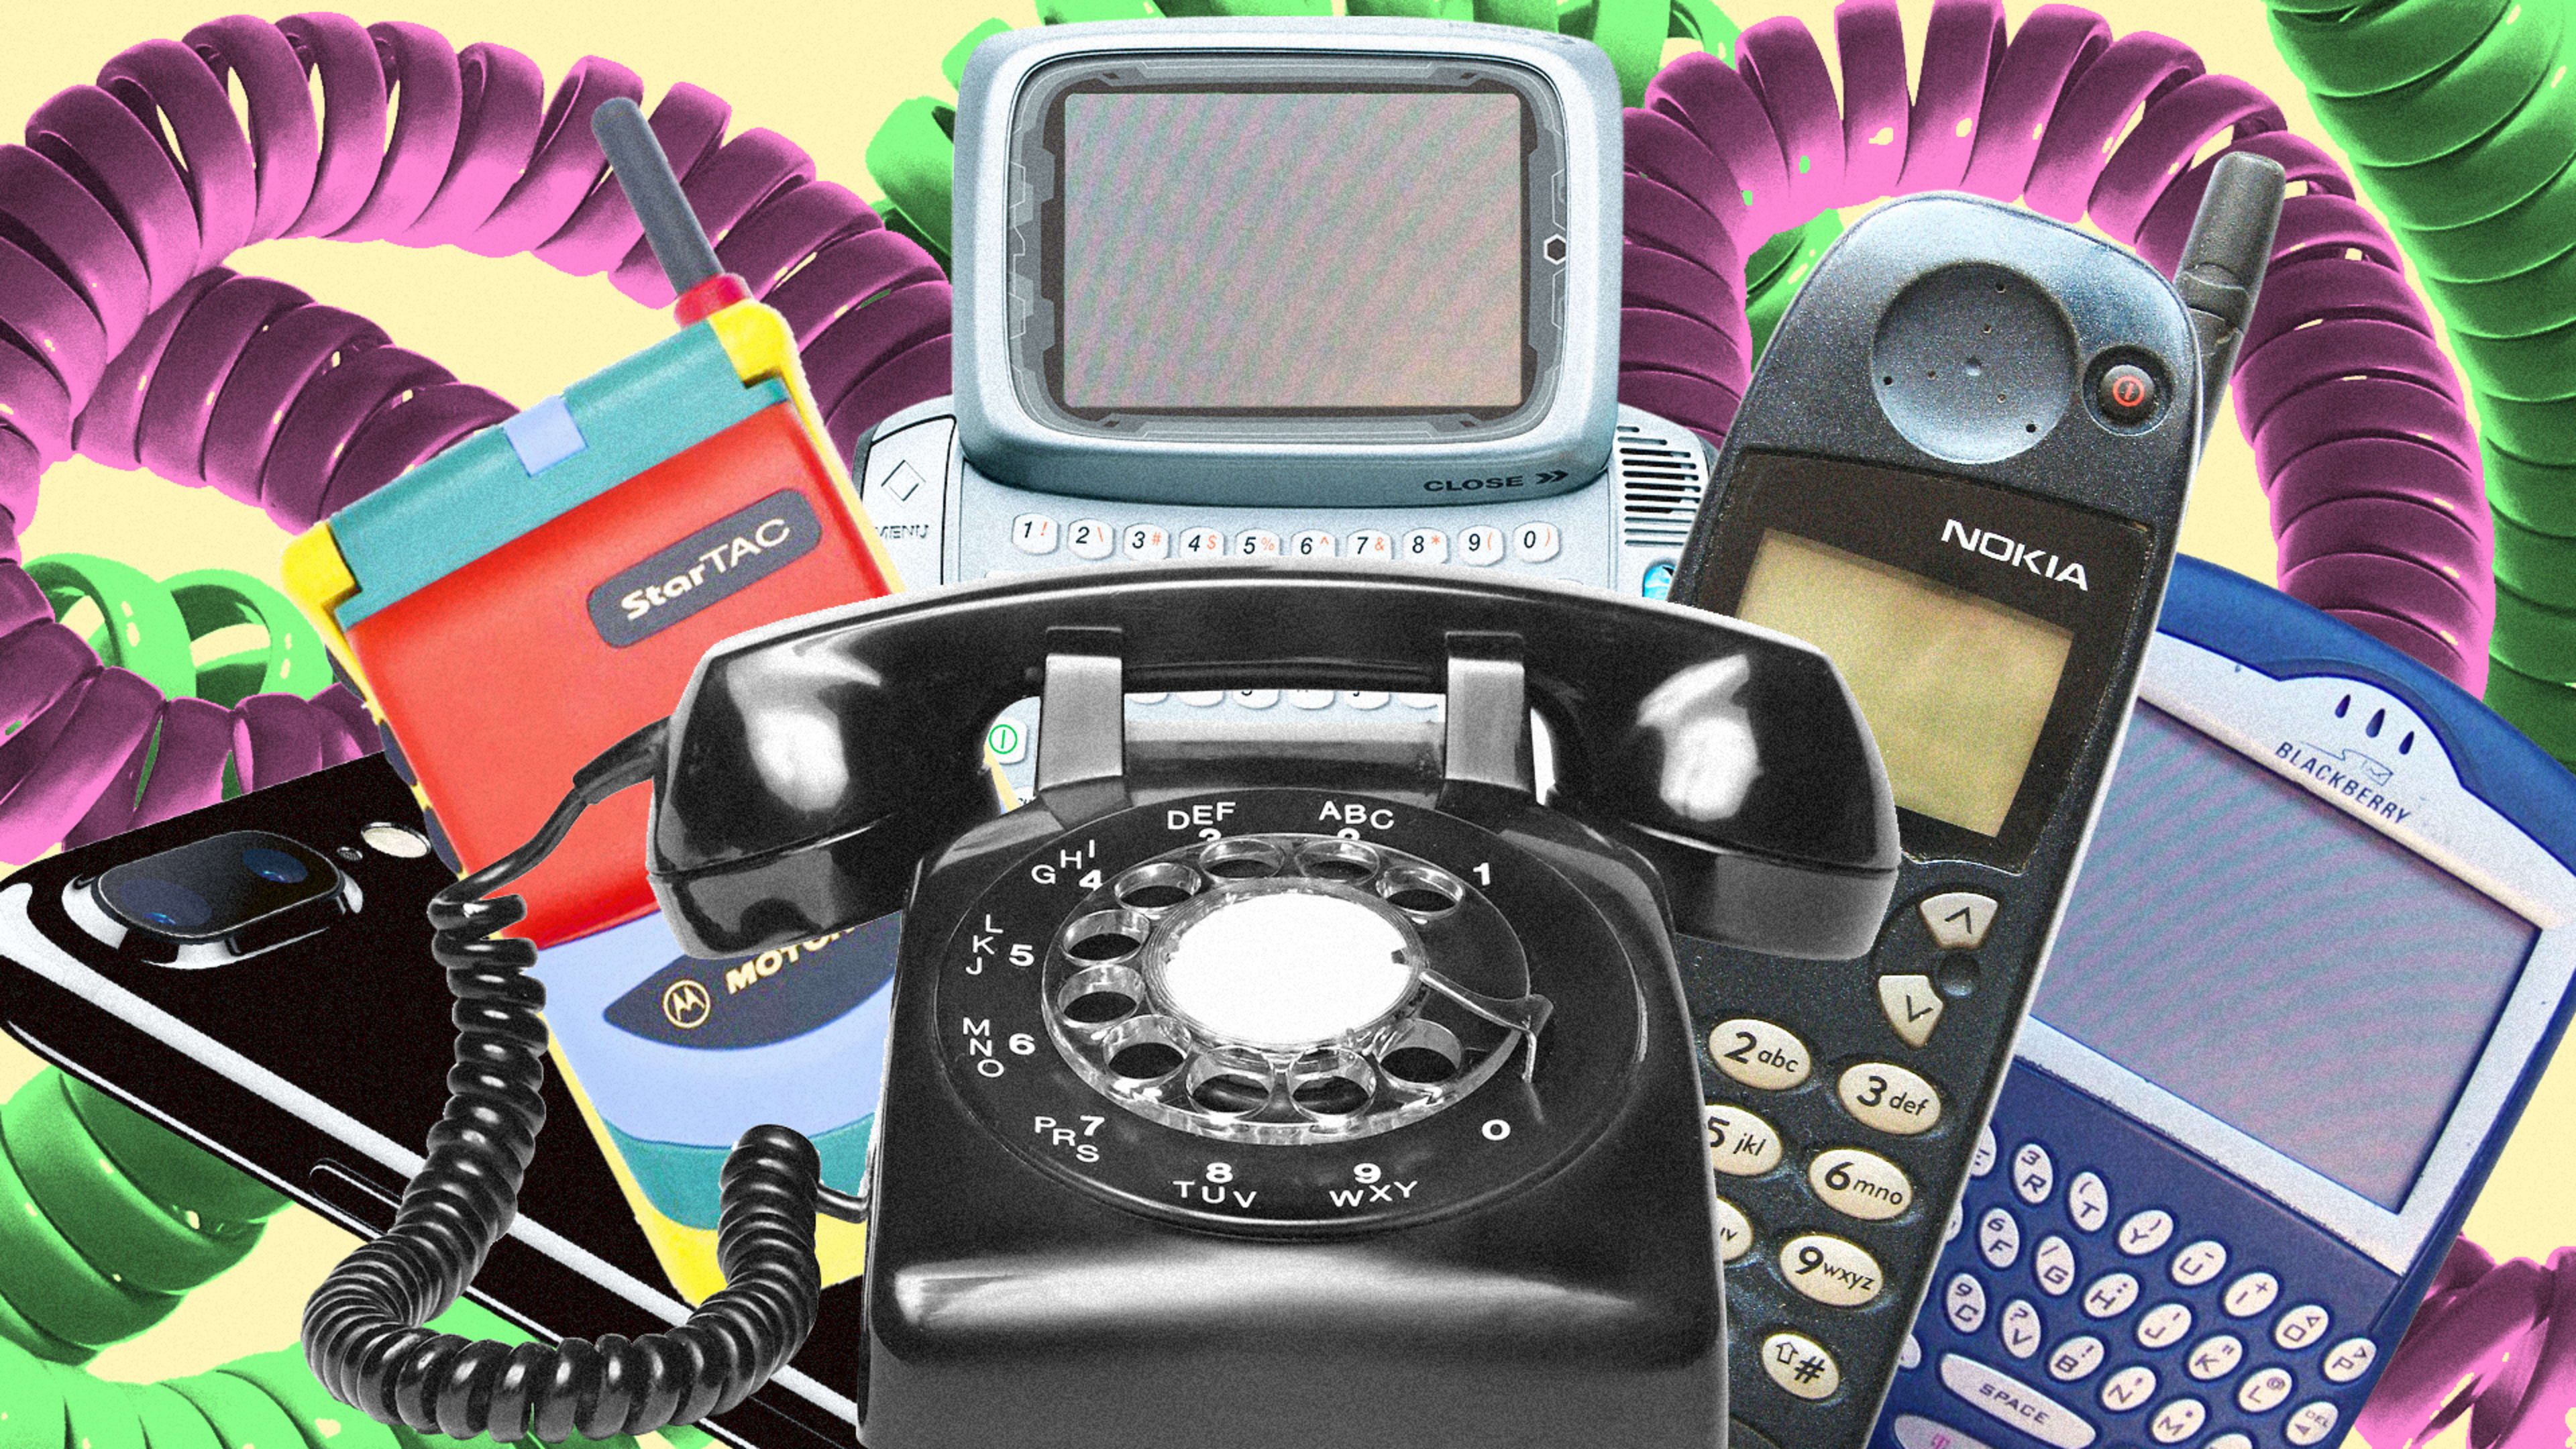 The best-designed phones of all time, according to the experts